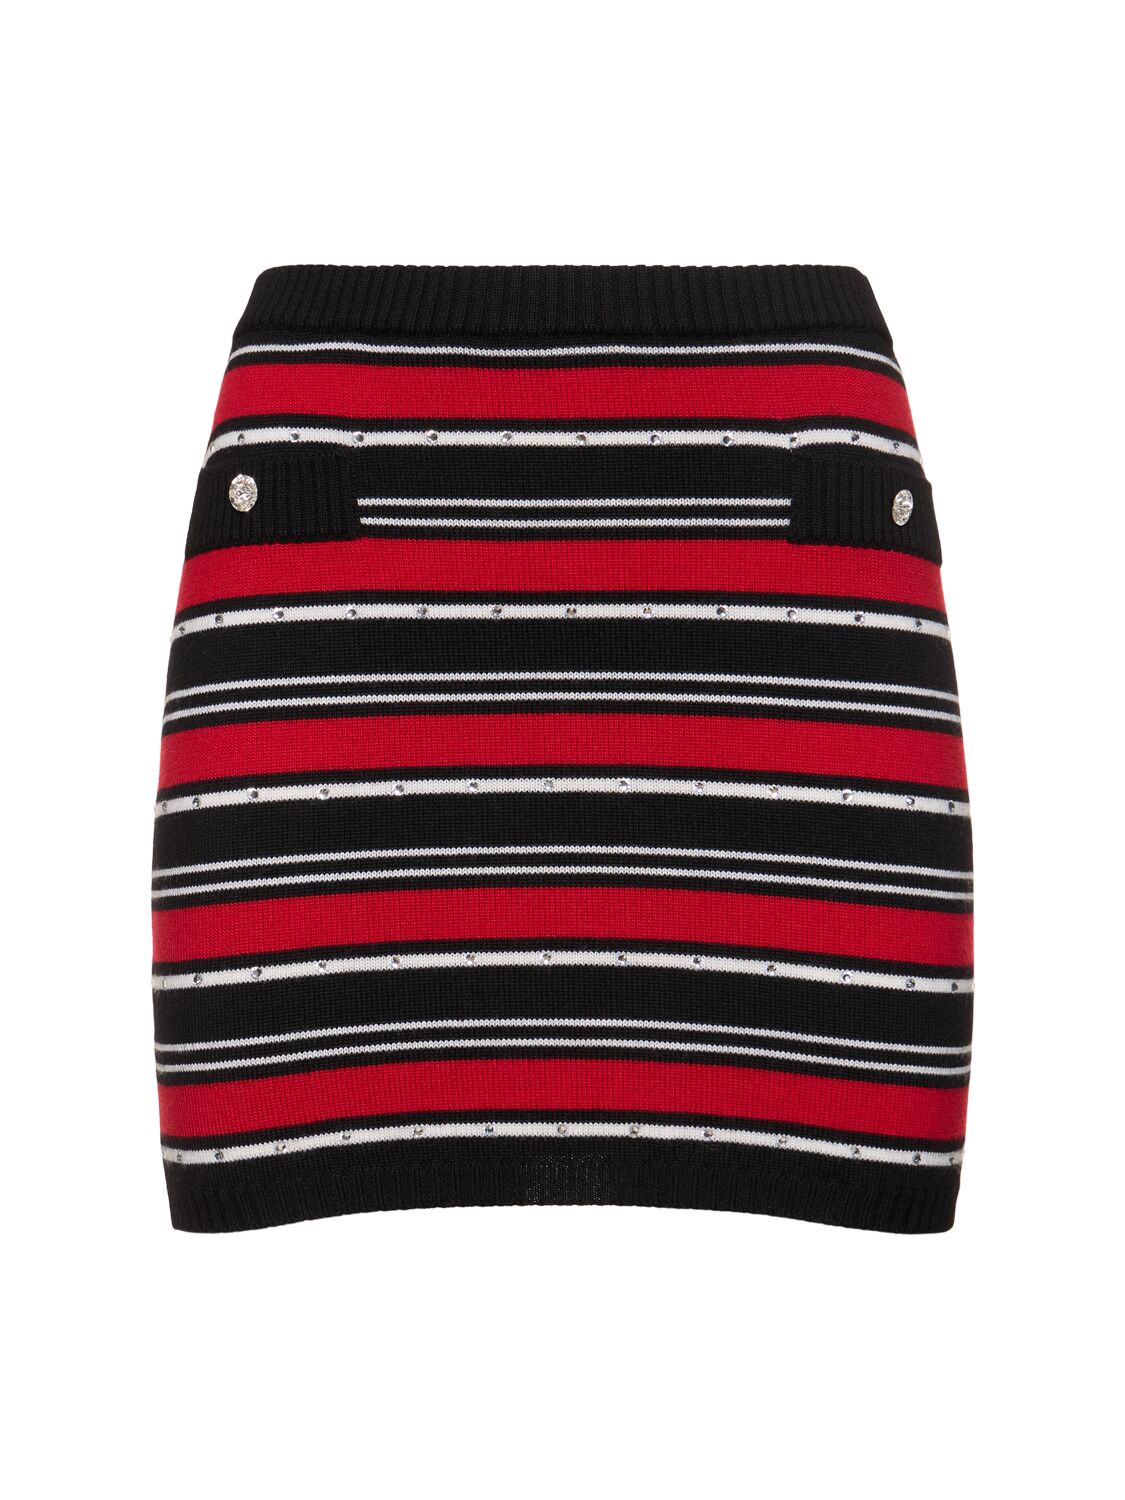 Alessandra Rich Striped Wool Knit Mini Skirt In Black/red/white